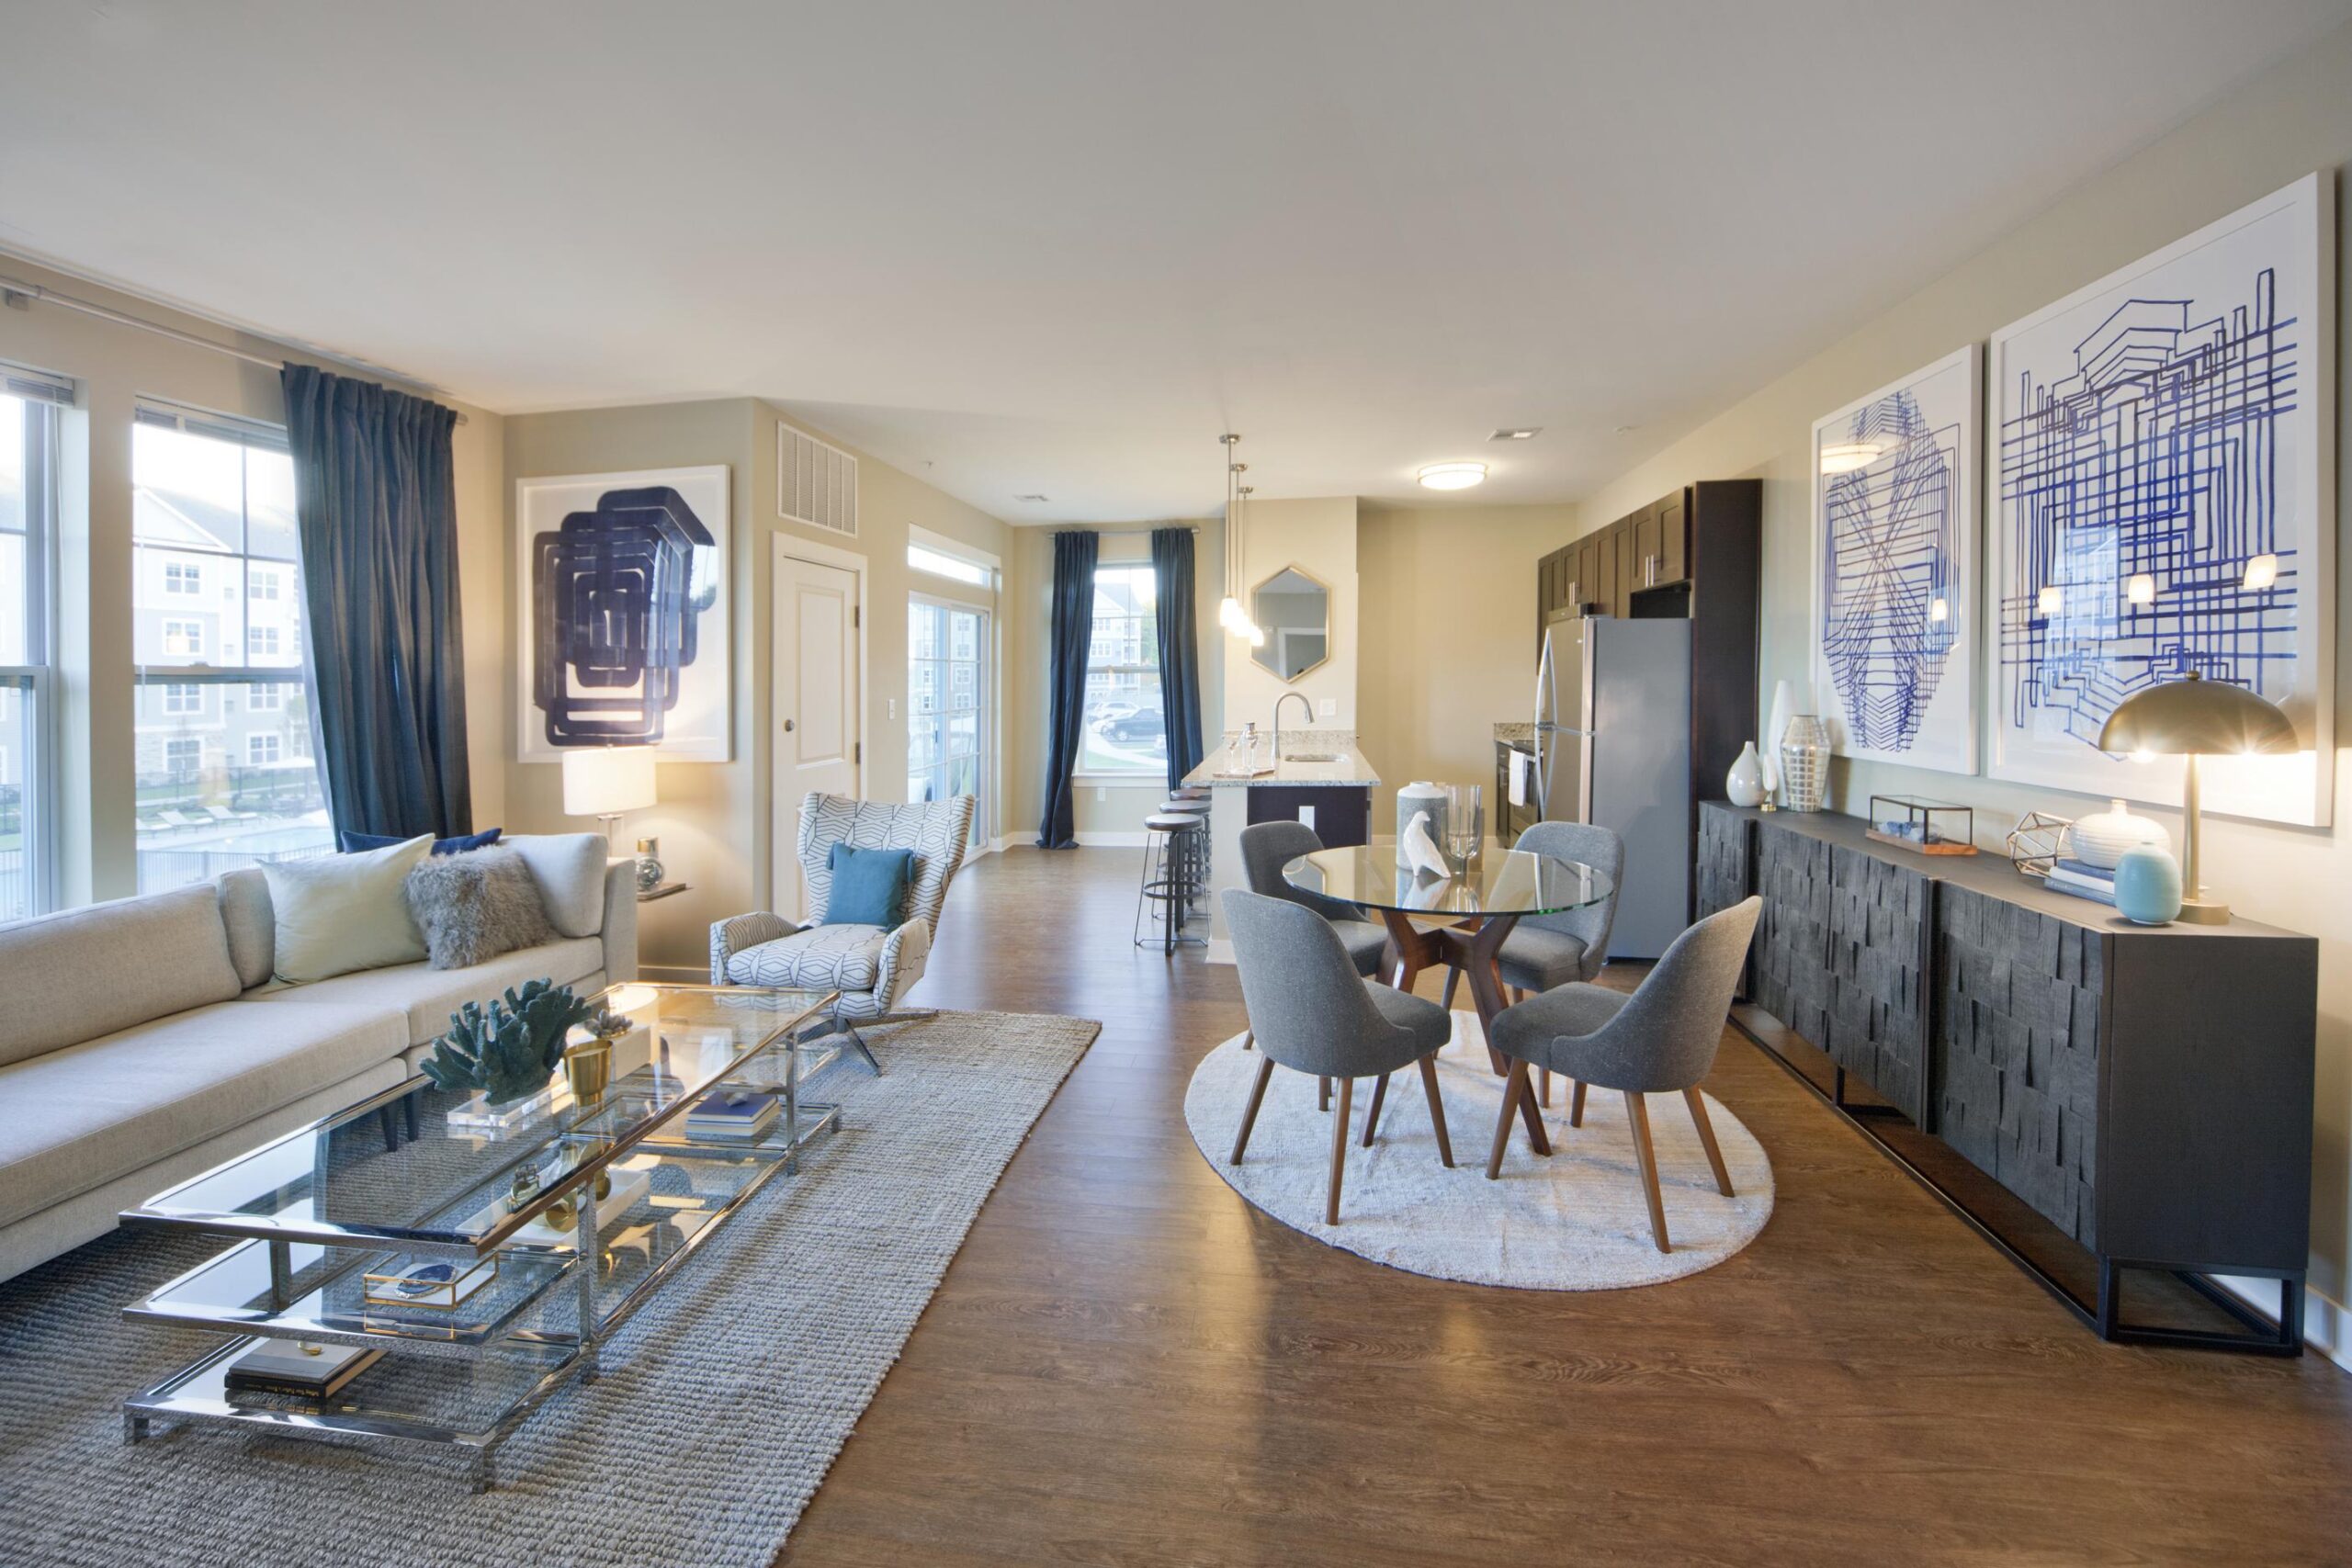 Living and dining areas with kitchen in background at Parc Westborough